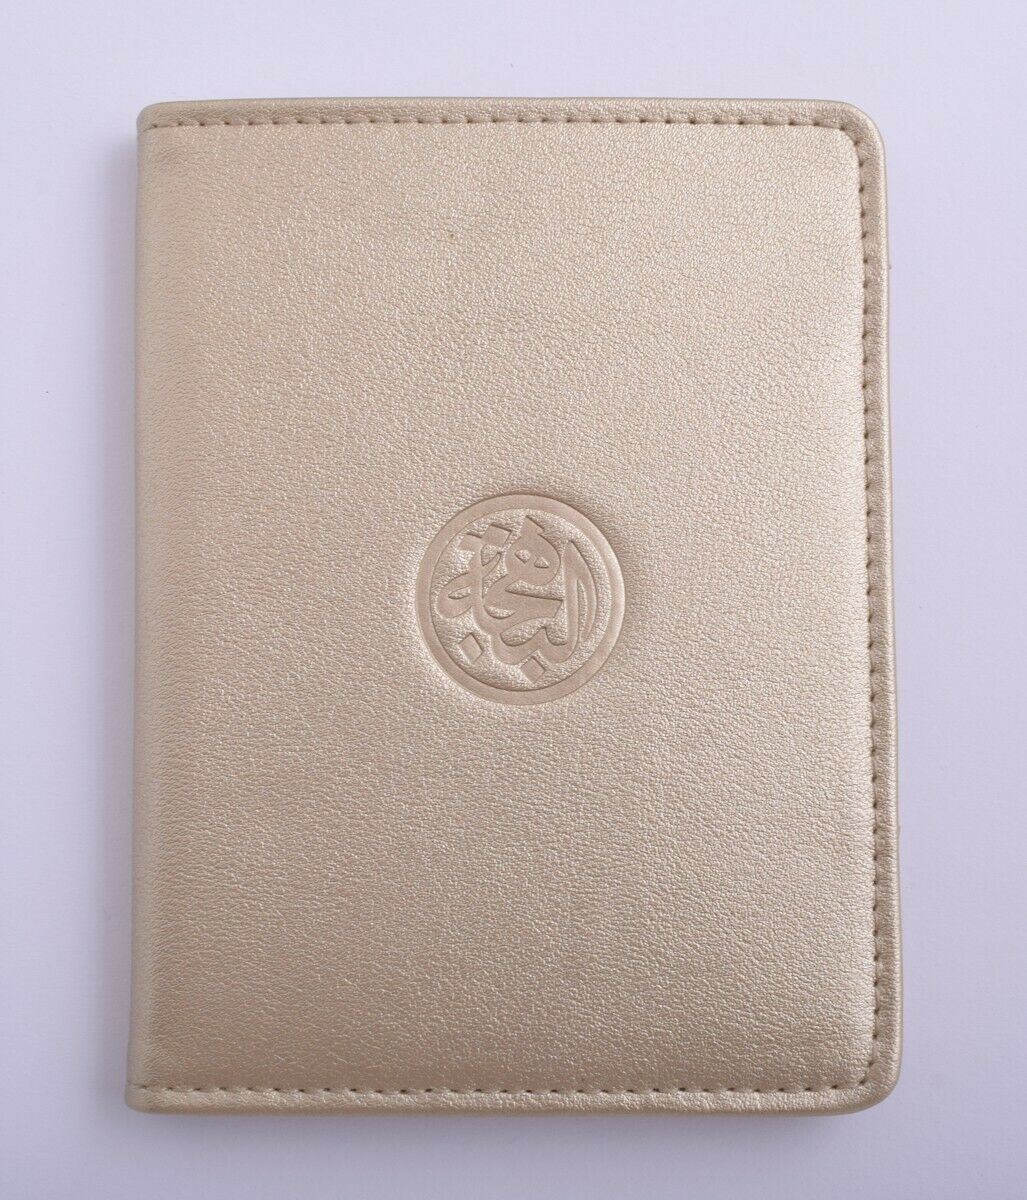 Passport Holder-Azza Fahmy-Handcrafted genuine etched leather Card holder Wallet